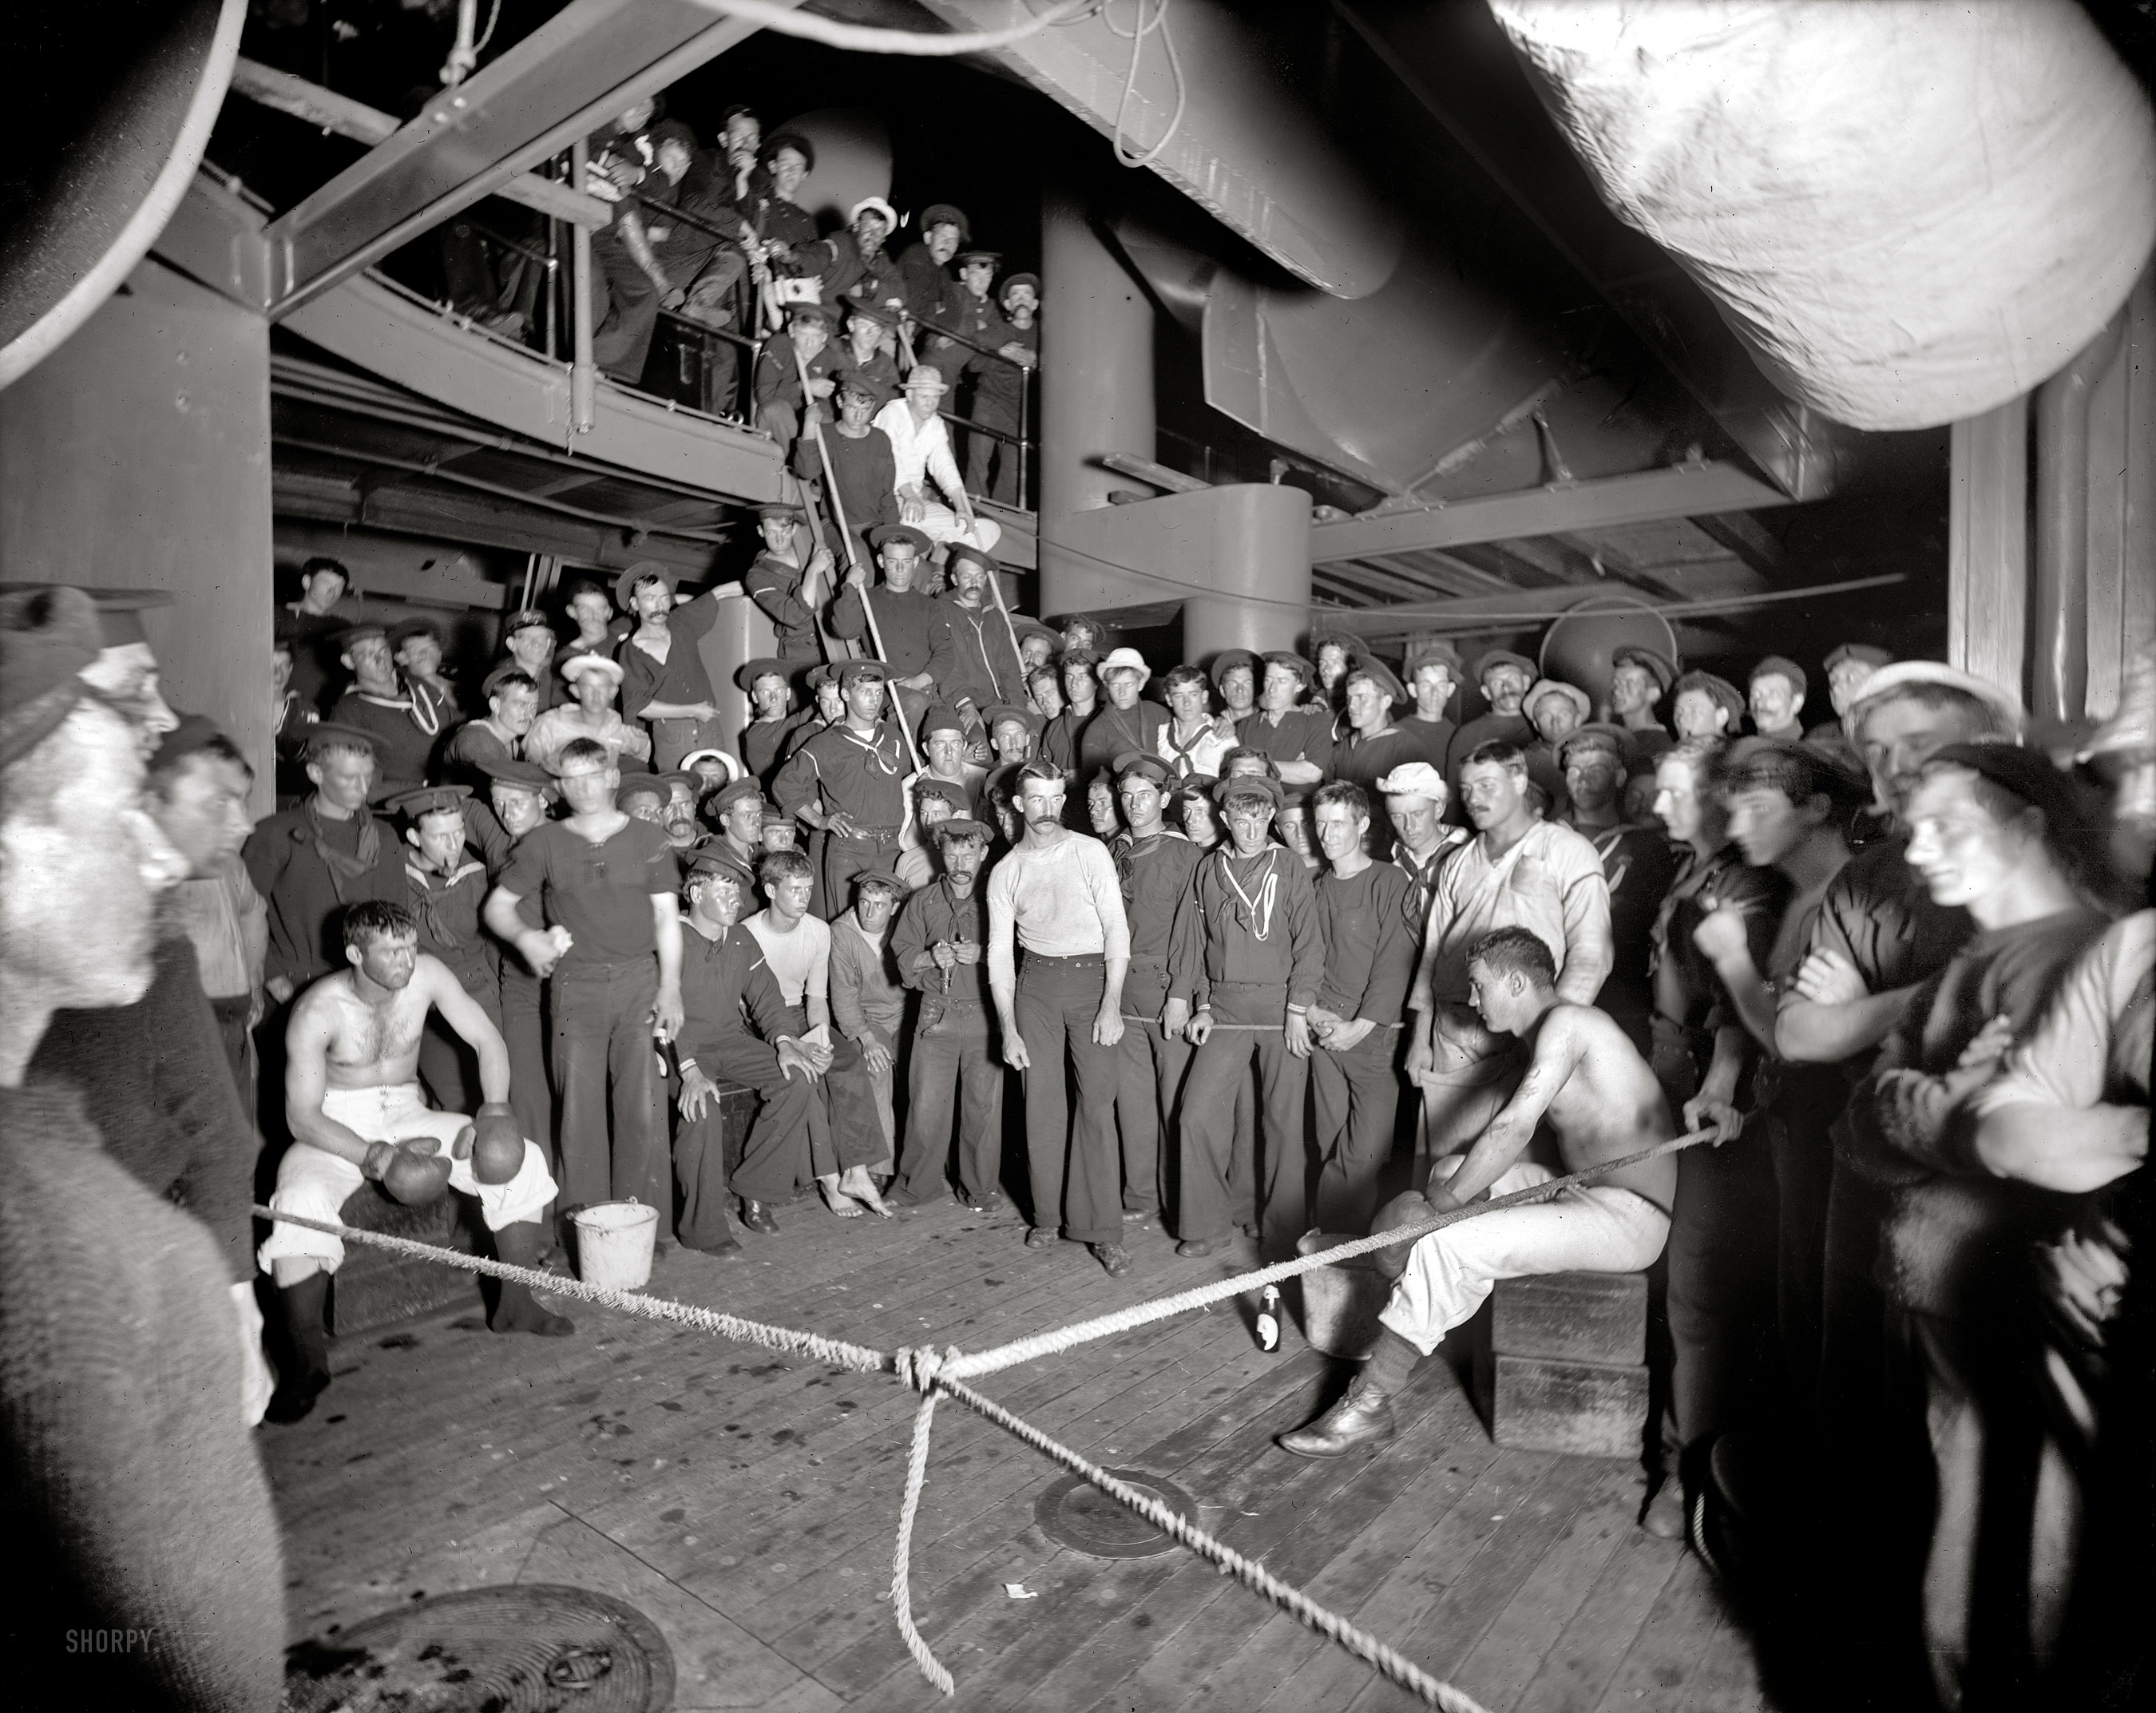 Aboard the U.S.S. Oregon circa 1897. "Waiting for the gong." 8x10 inch dry plate glass negative by Edward H. Hart, Detroit Publishing Company. View full size.